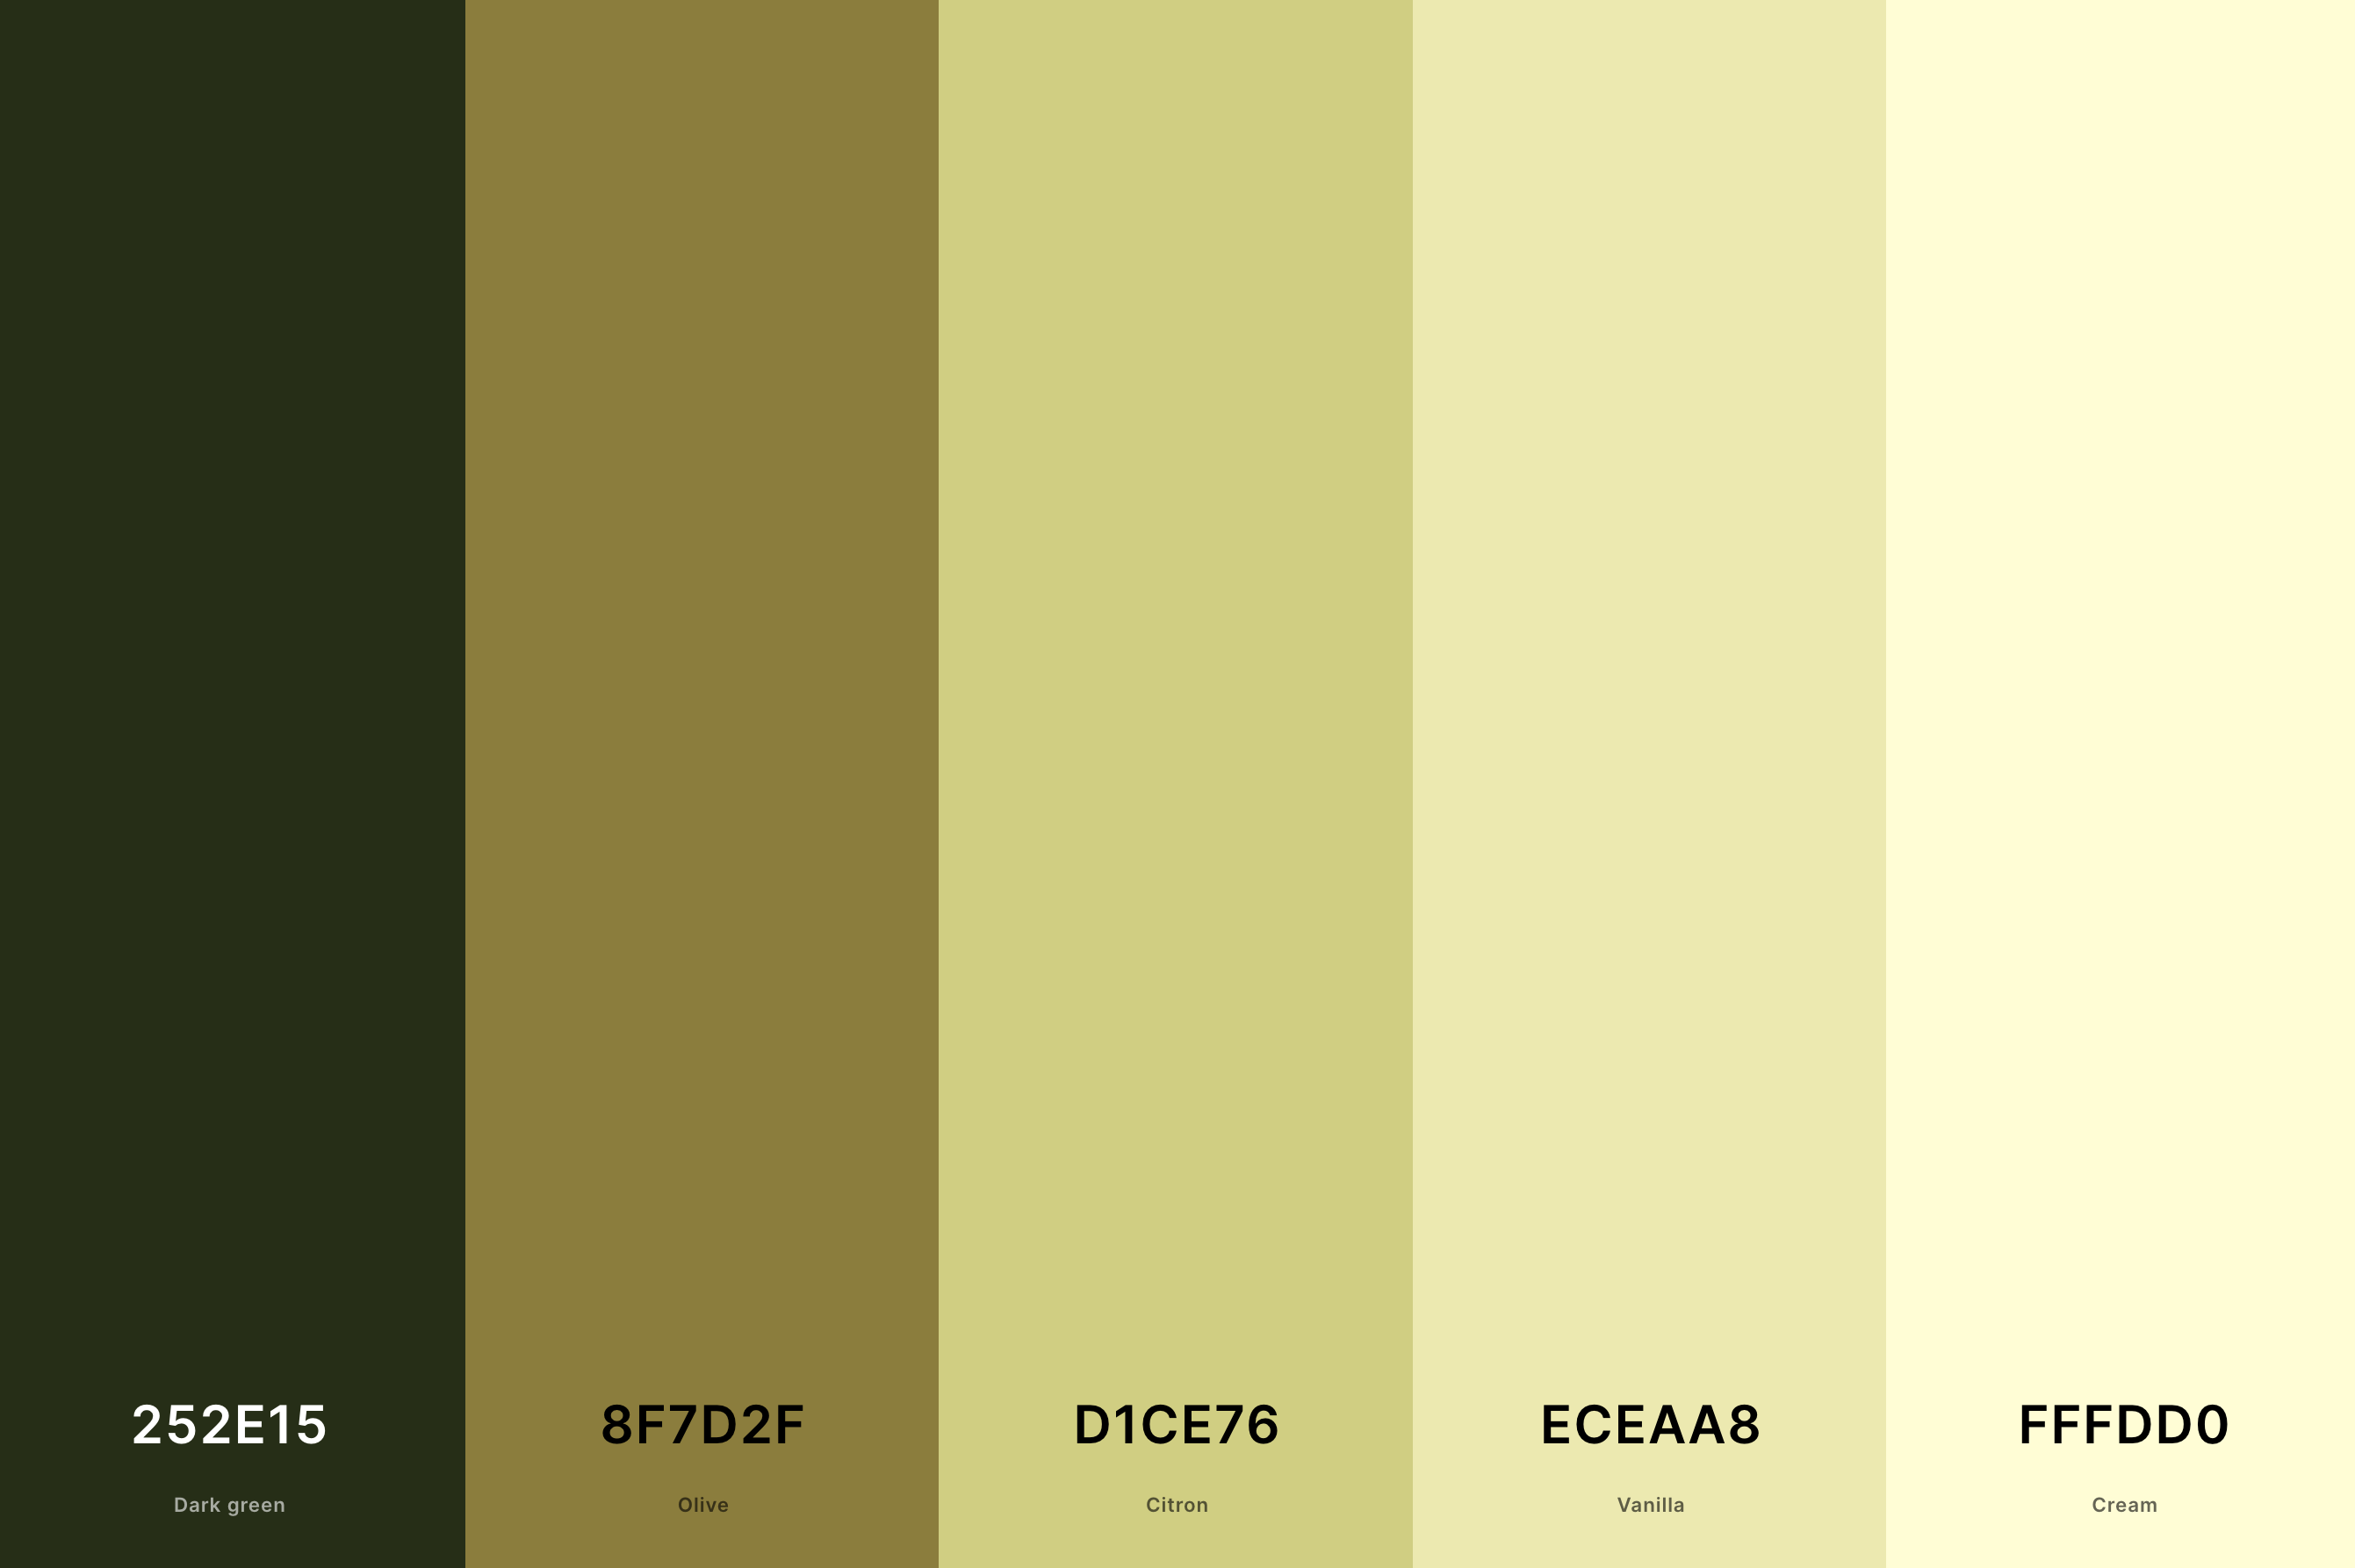 27. Cream And Olive Green Color Palette Color Palette with Dark Green (Hex #252E15) + Olive (Hex #8F7D2F) + Citron (Hex #D1CE76) + Vanilla (Hex #ECEAA8) + Cream (Hex #FFFDD0) Color Palette with Hex Codes